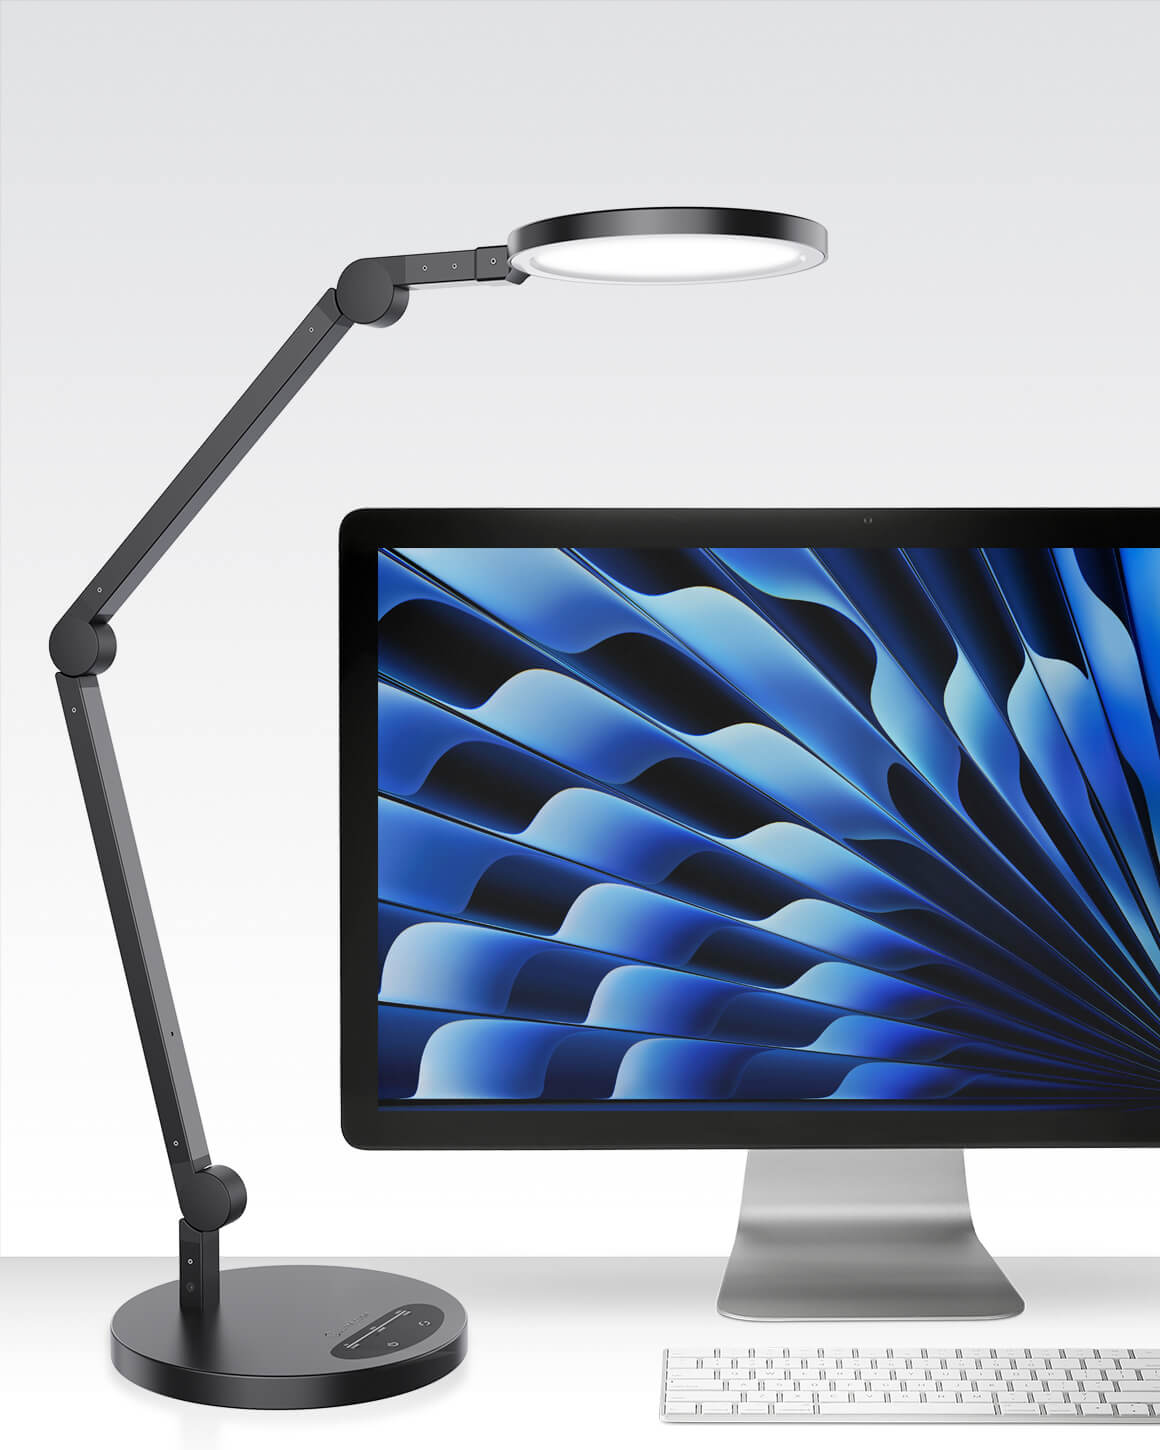 This Monitor Light Bar Offers Task Lighting for Late-Night Computer Work